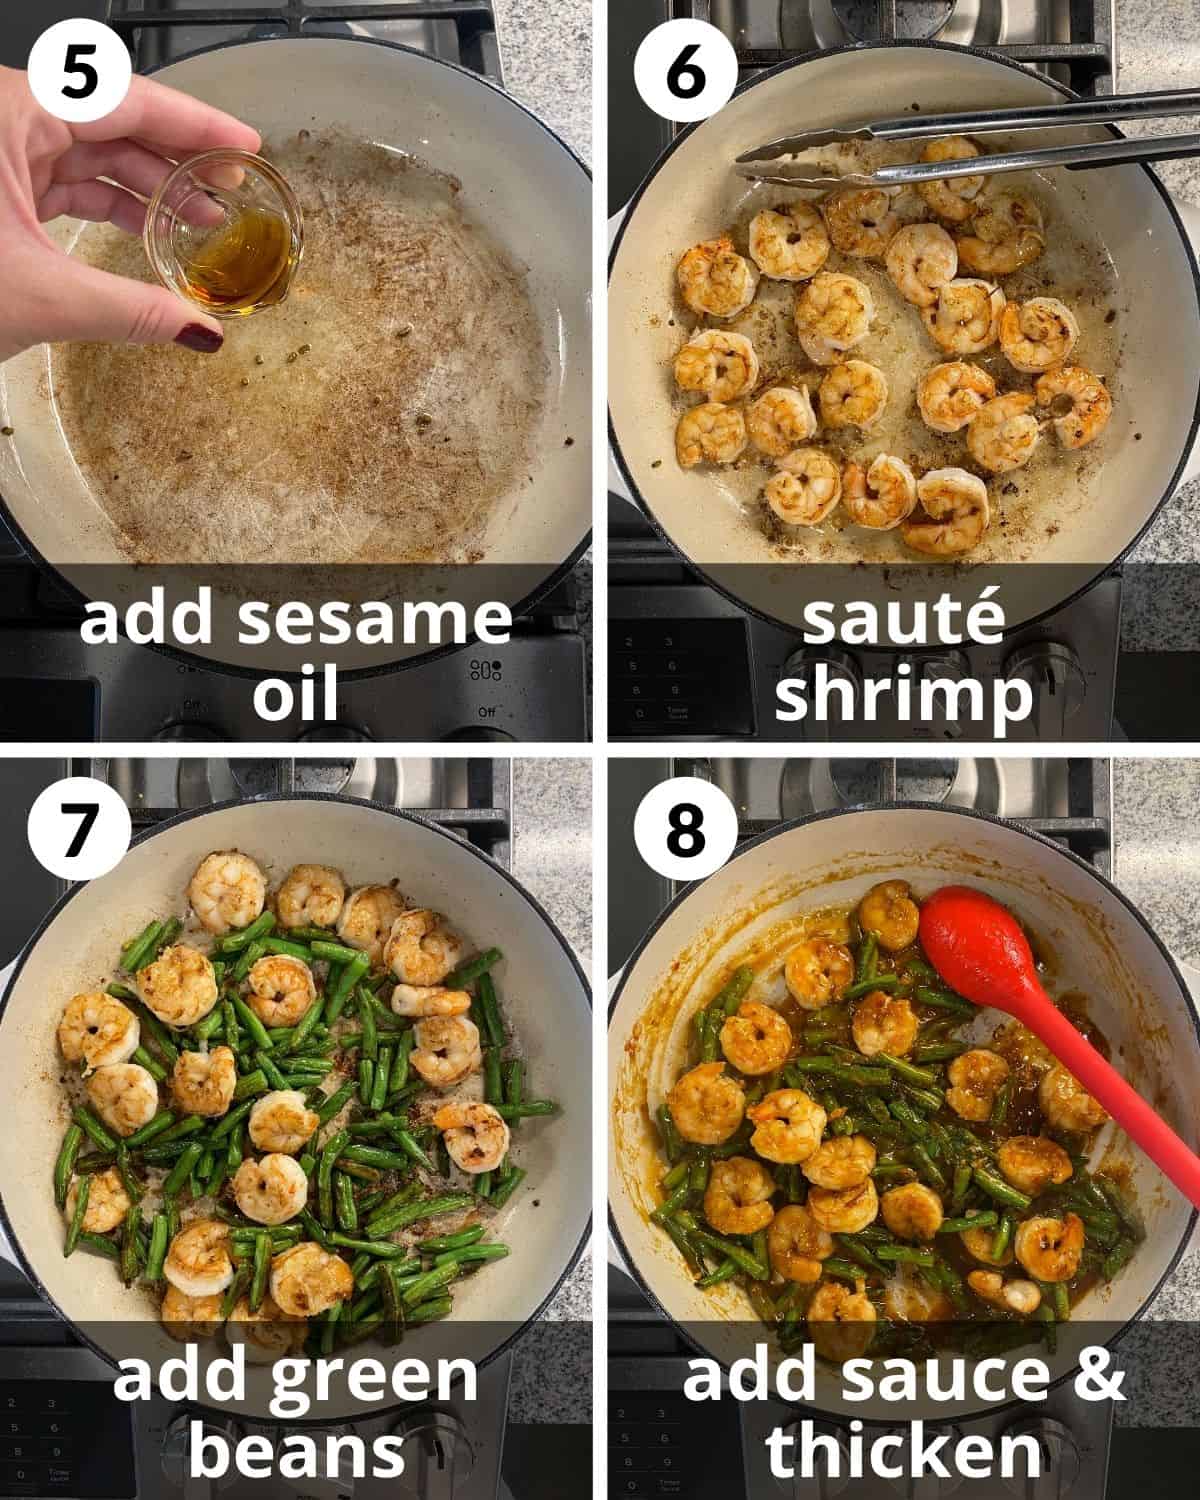 4 photos. Sesame oil being poured. Shrimp cooking. Green beans added. Sauce added. 